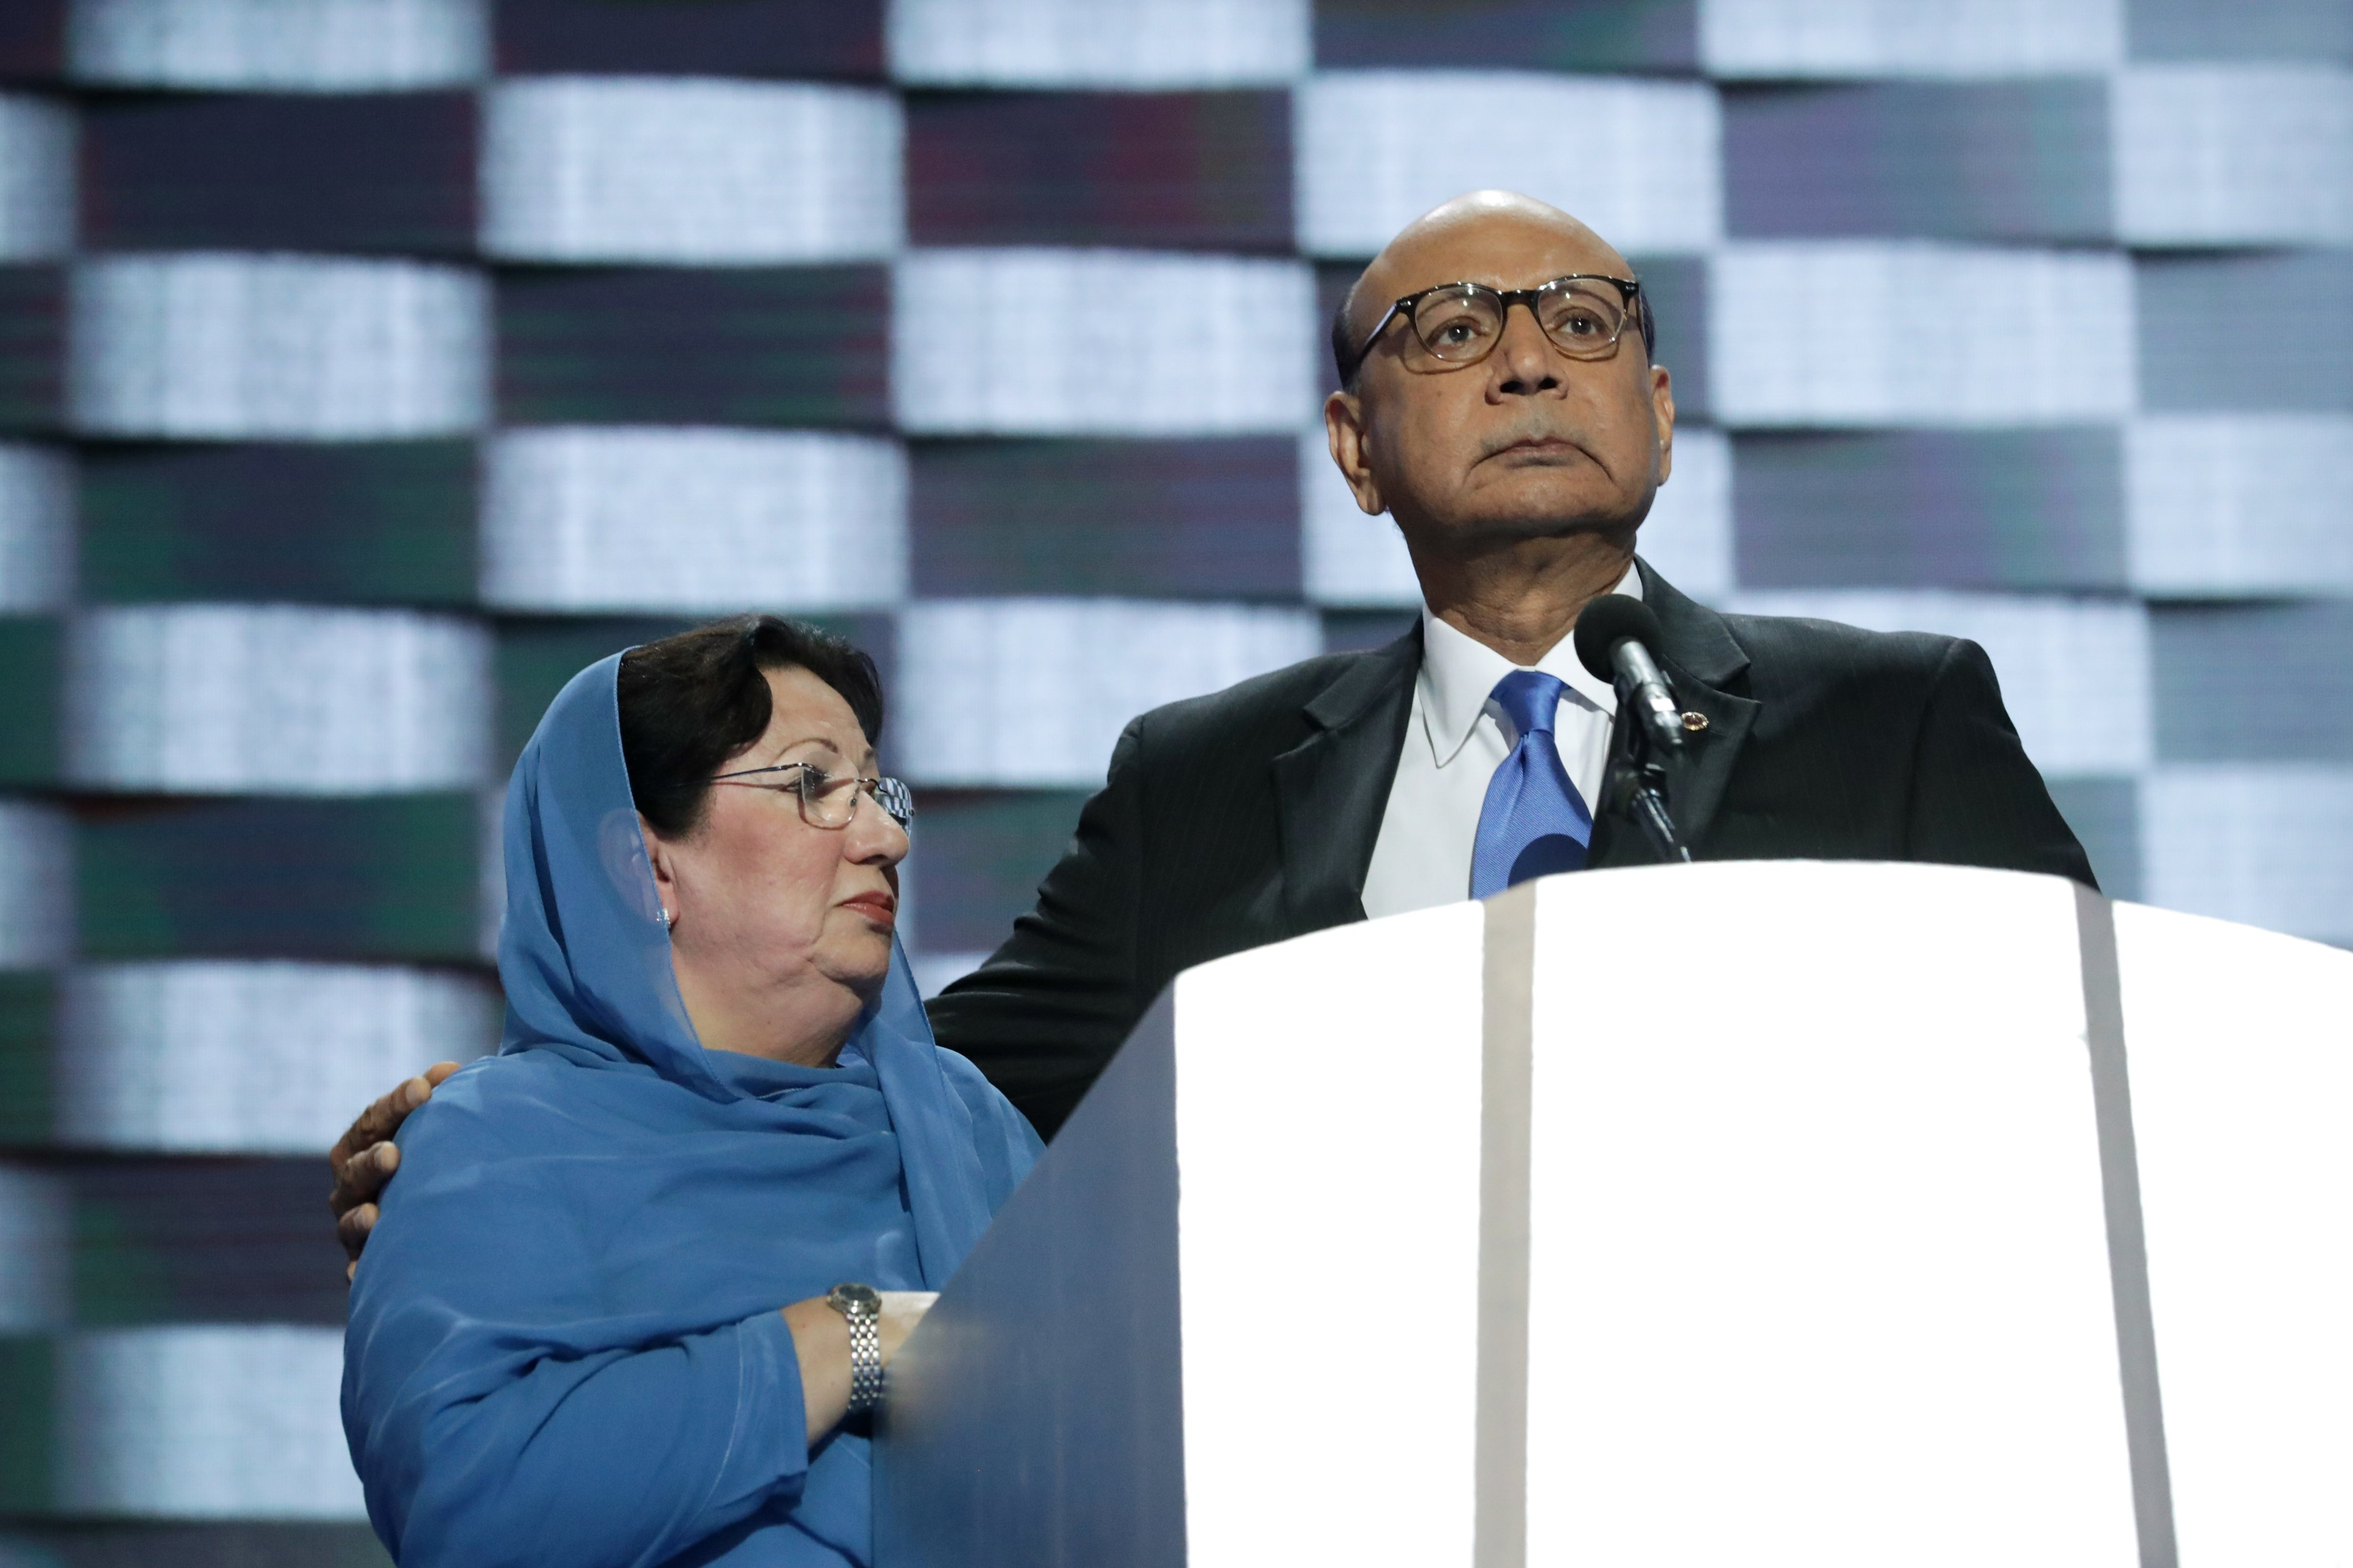 Khizr Khan, father of deceased U.S. Army Capt. Humayun Khan, delivers remarks as he is joined by his wife Ghazala Khan at the Democratic National Convention on July 28, 2016. (Joe Raedle&mdash;Getty Images)